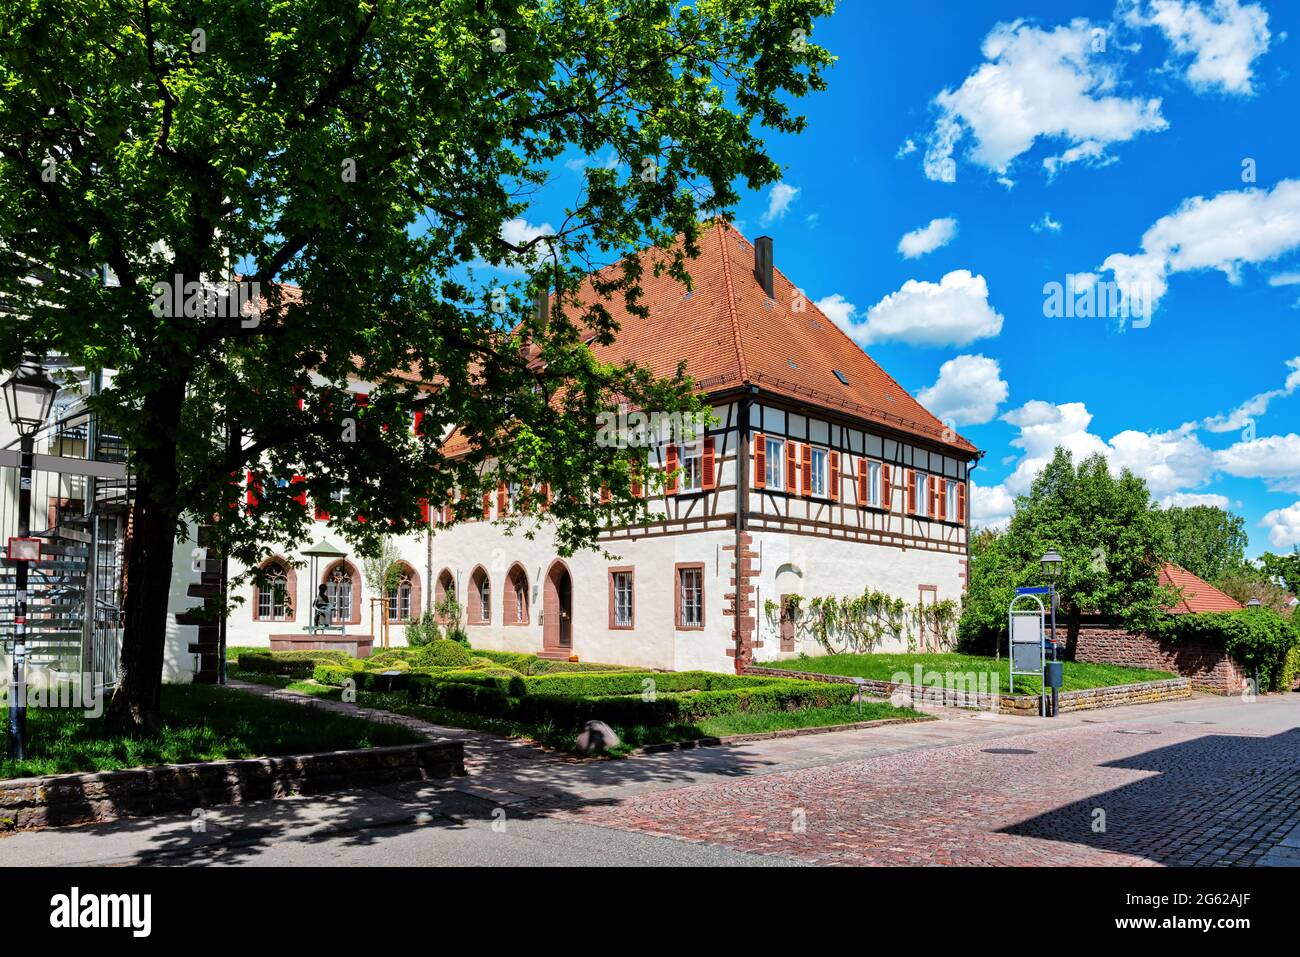 Cityscape of Weil der Stadt, Wuerttemberg, Germany Stock Photo